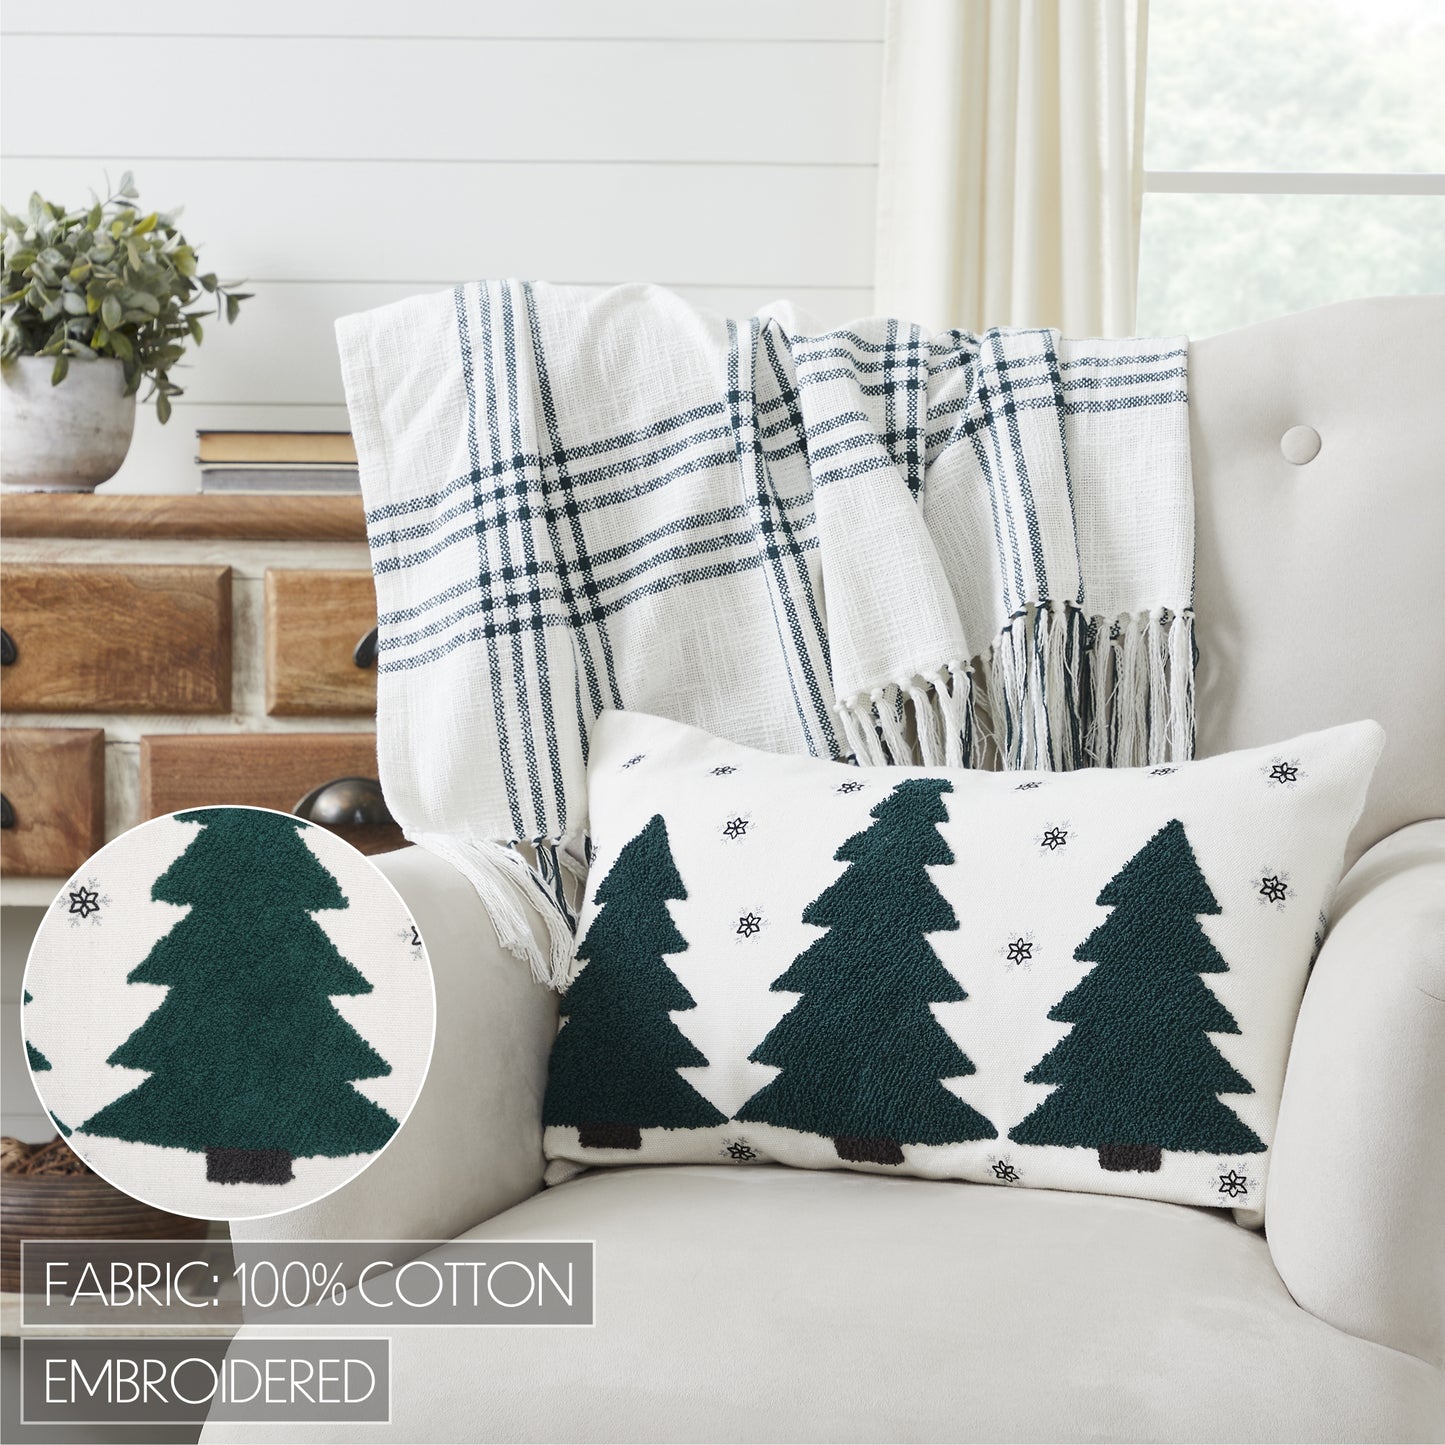 80425-Pine-Grove-Plaid-Embroidered-Trees-Pillow-Cover-14x22-image-2